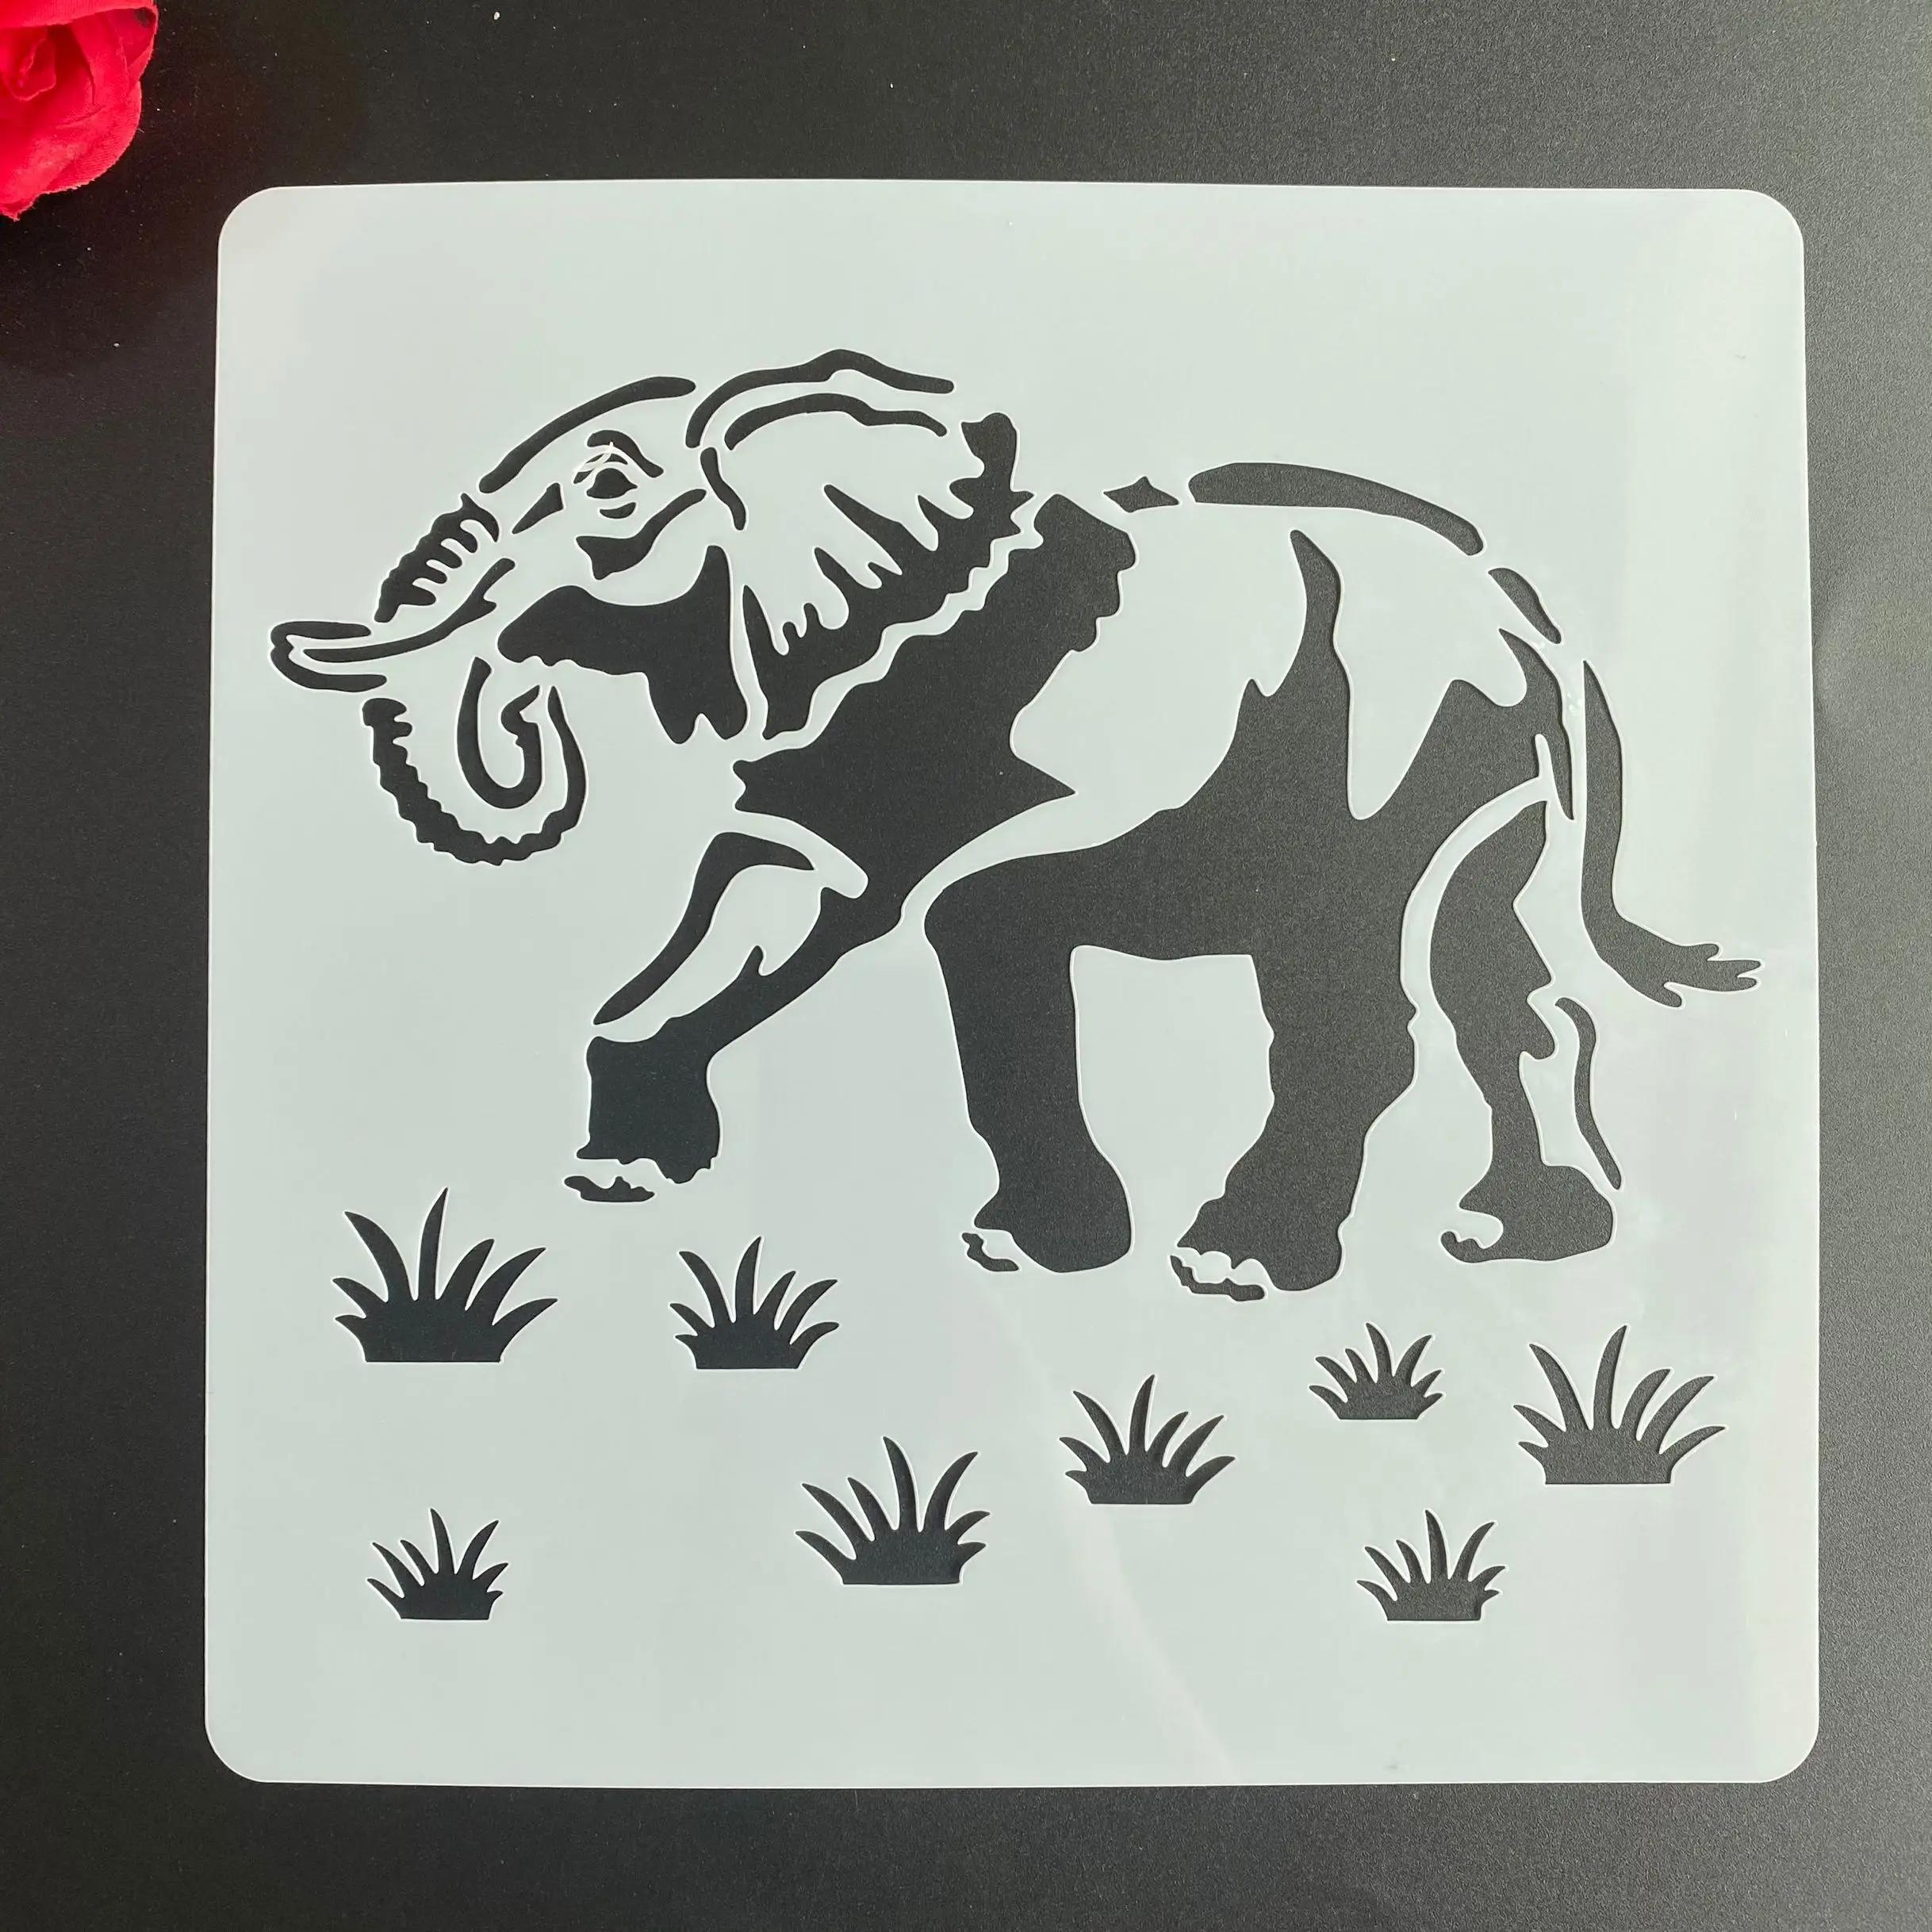 20 *20 cm  DIY elephant animal mandala mold for painting stencils stamped photo album embossed paper card on wood, f